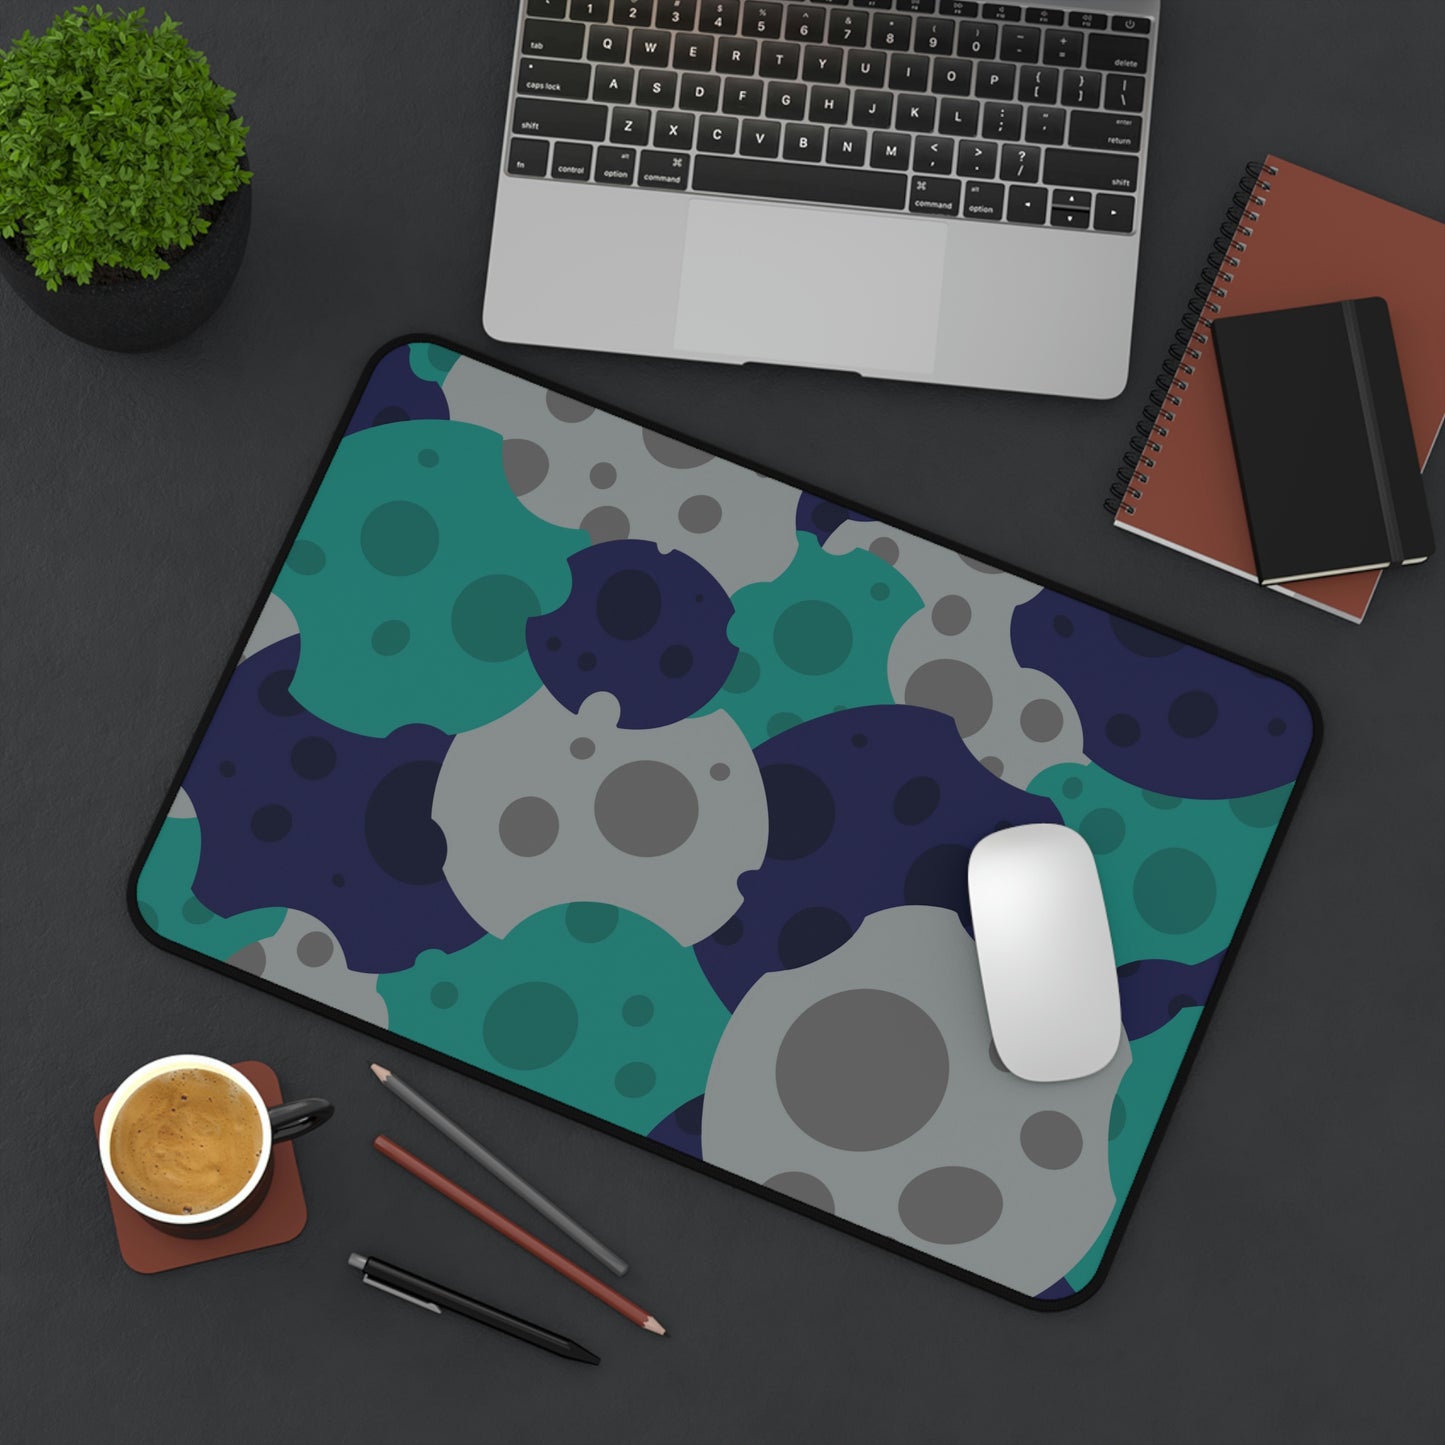 A 12" x 18" desk mat with gray, teal, and dark blue meteorites sitting at an angle.